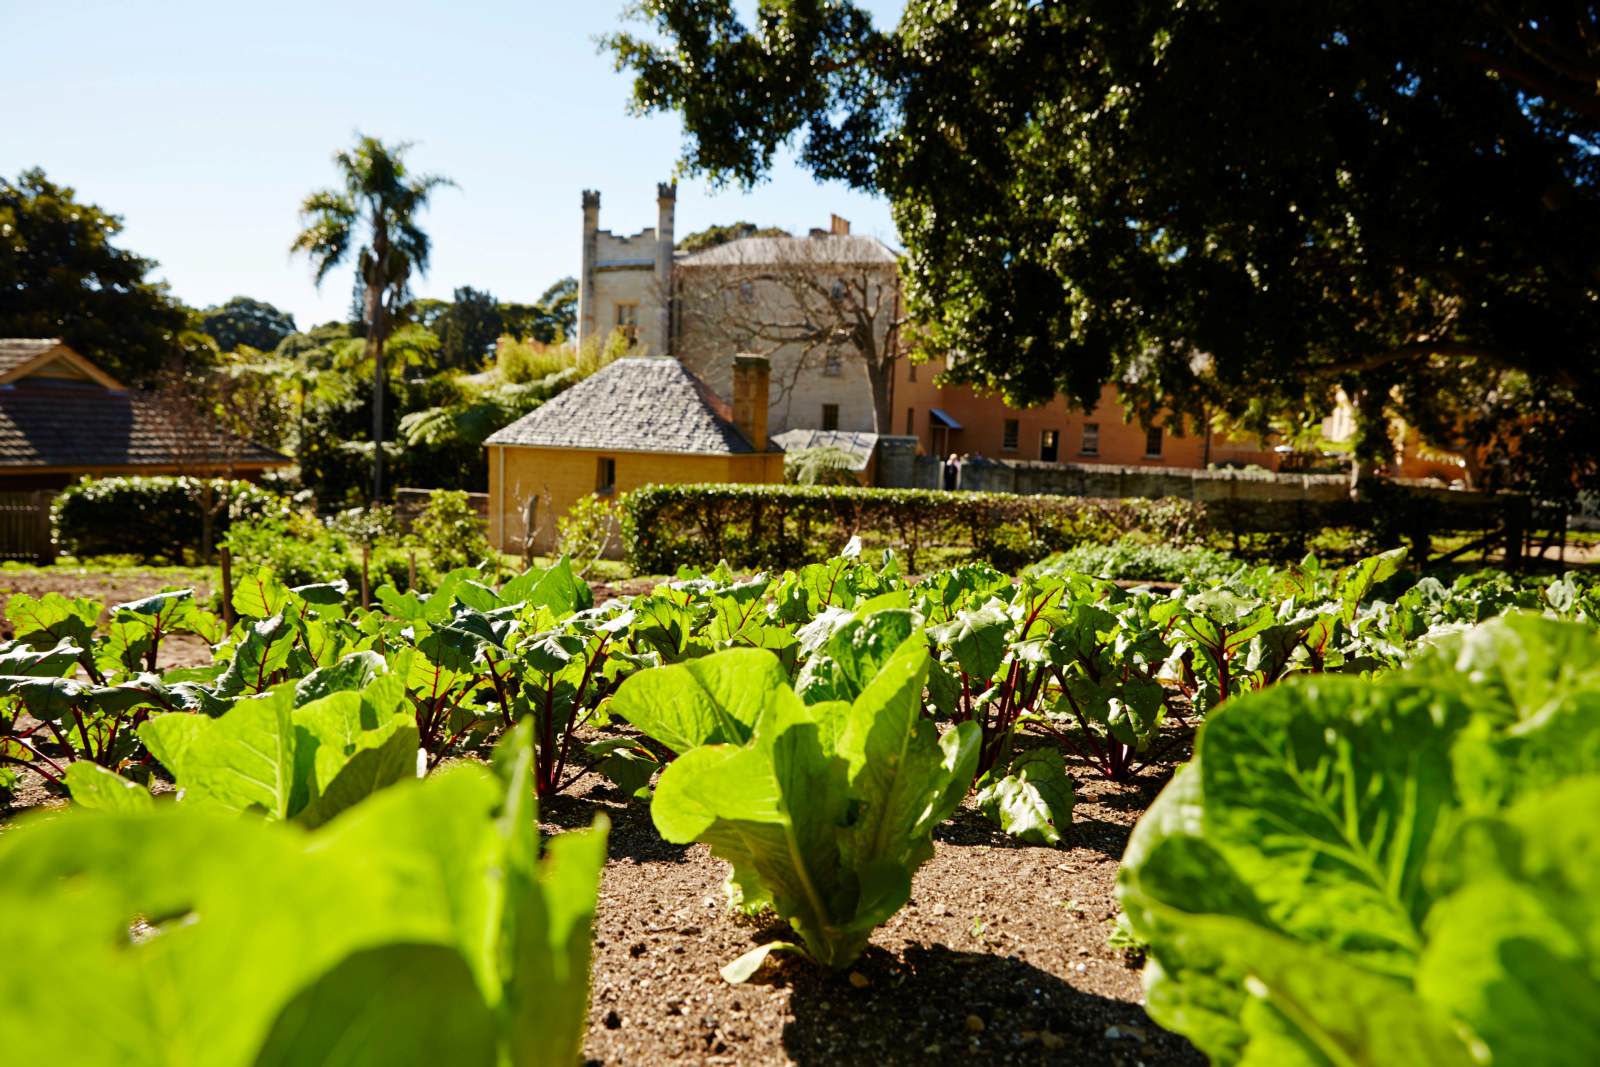 View looking over the kitchen garden at Vaucluse house on a sunny day with clear skies. In the foreground are rows of plants arranged very neatly and the house can be seen in the background.